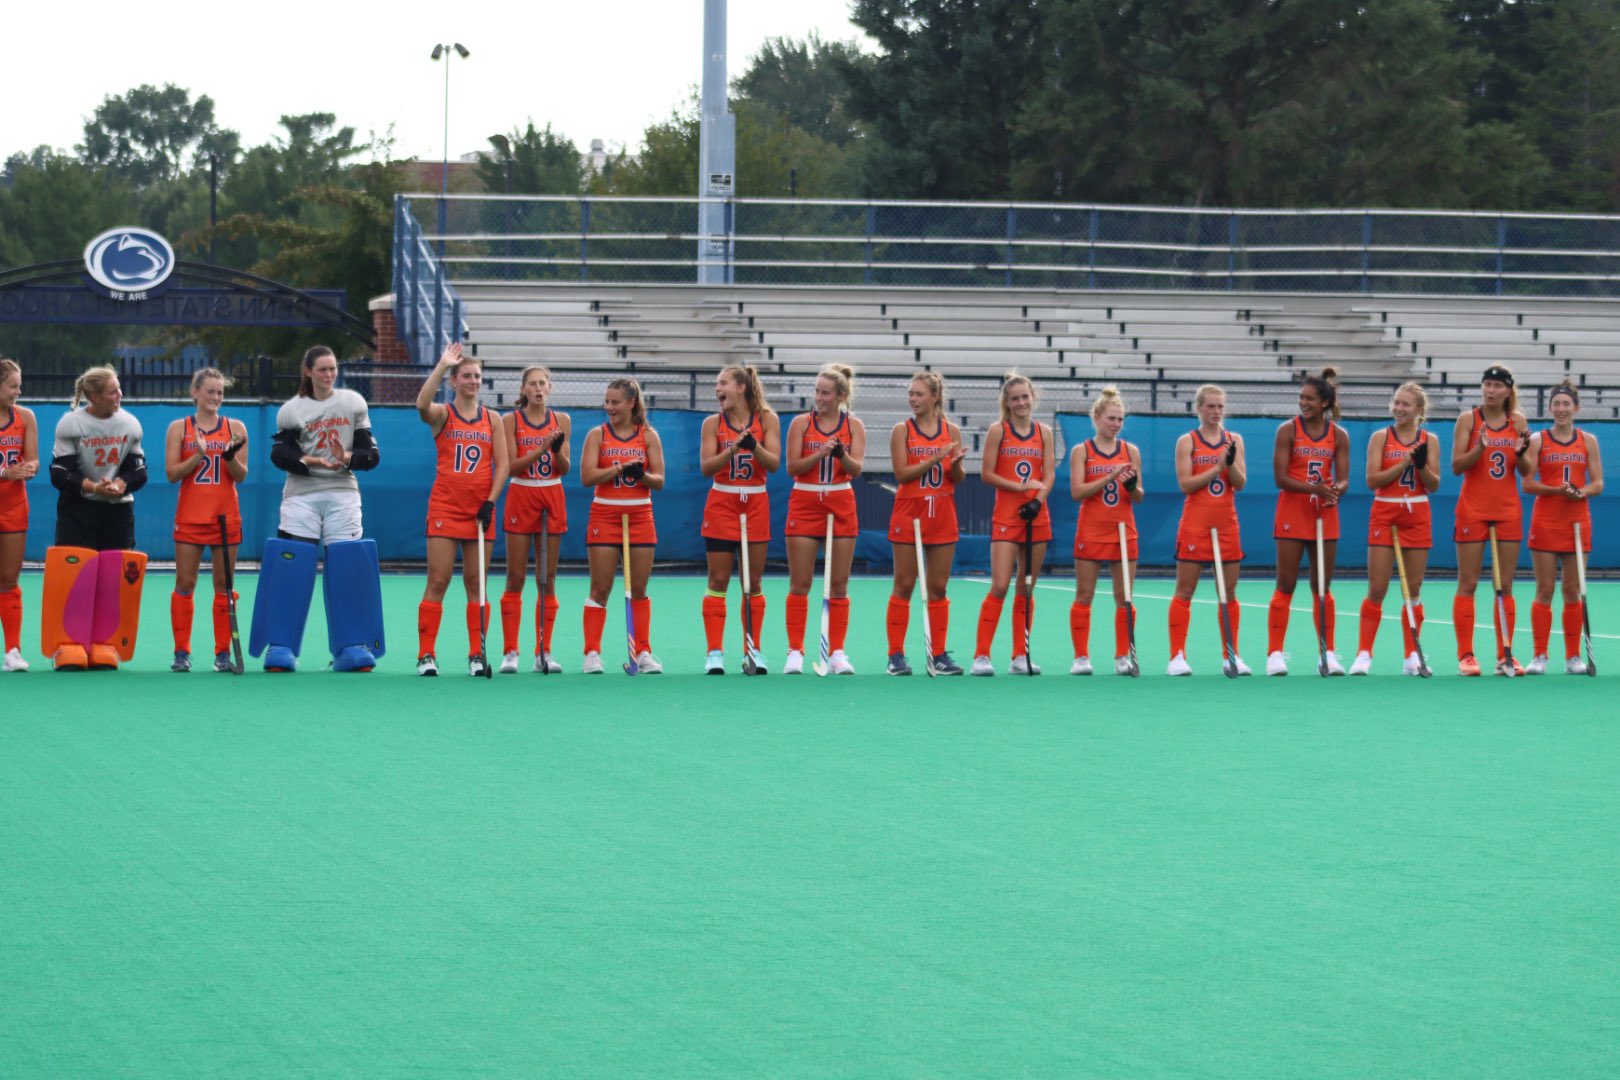 No. 12 Virginia edged late in season opener at No. 11 Penn State, 3-2